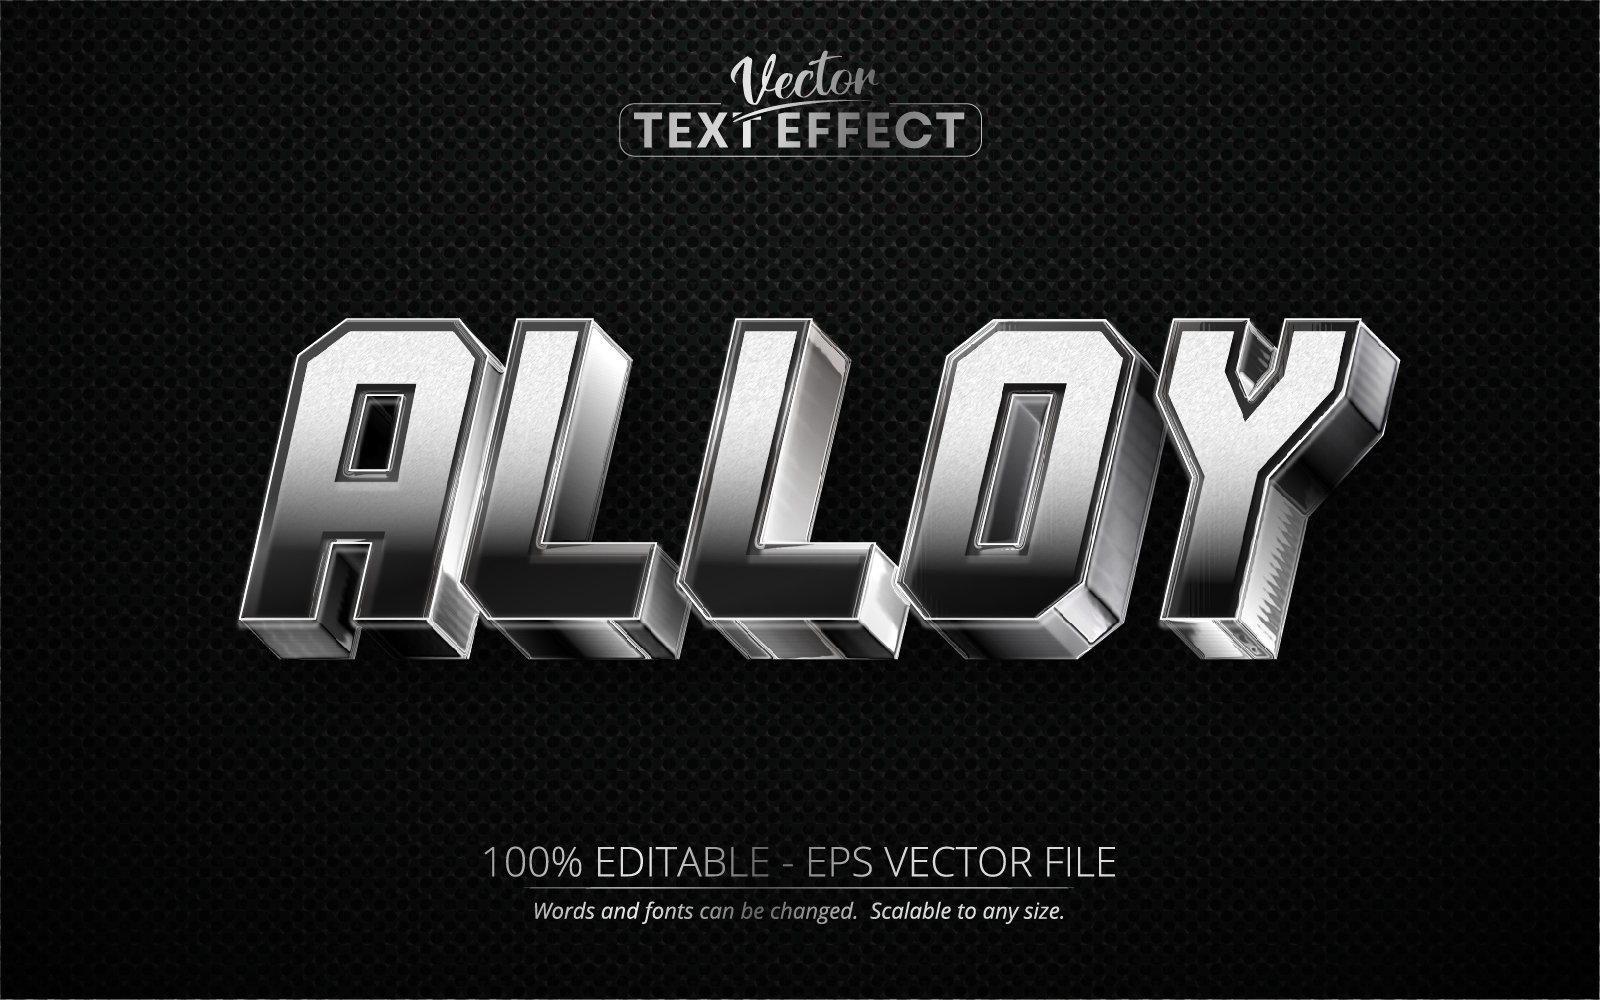 Silver - Editable Text Effect, Metallic Silver Shiny Text Style, Graphics Illustration